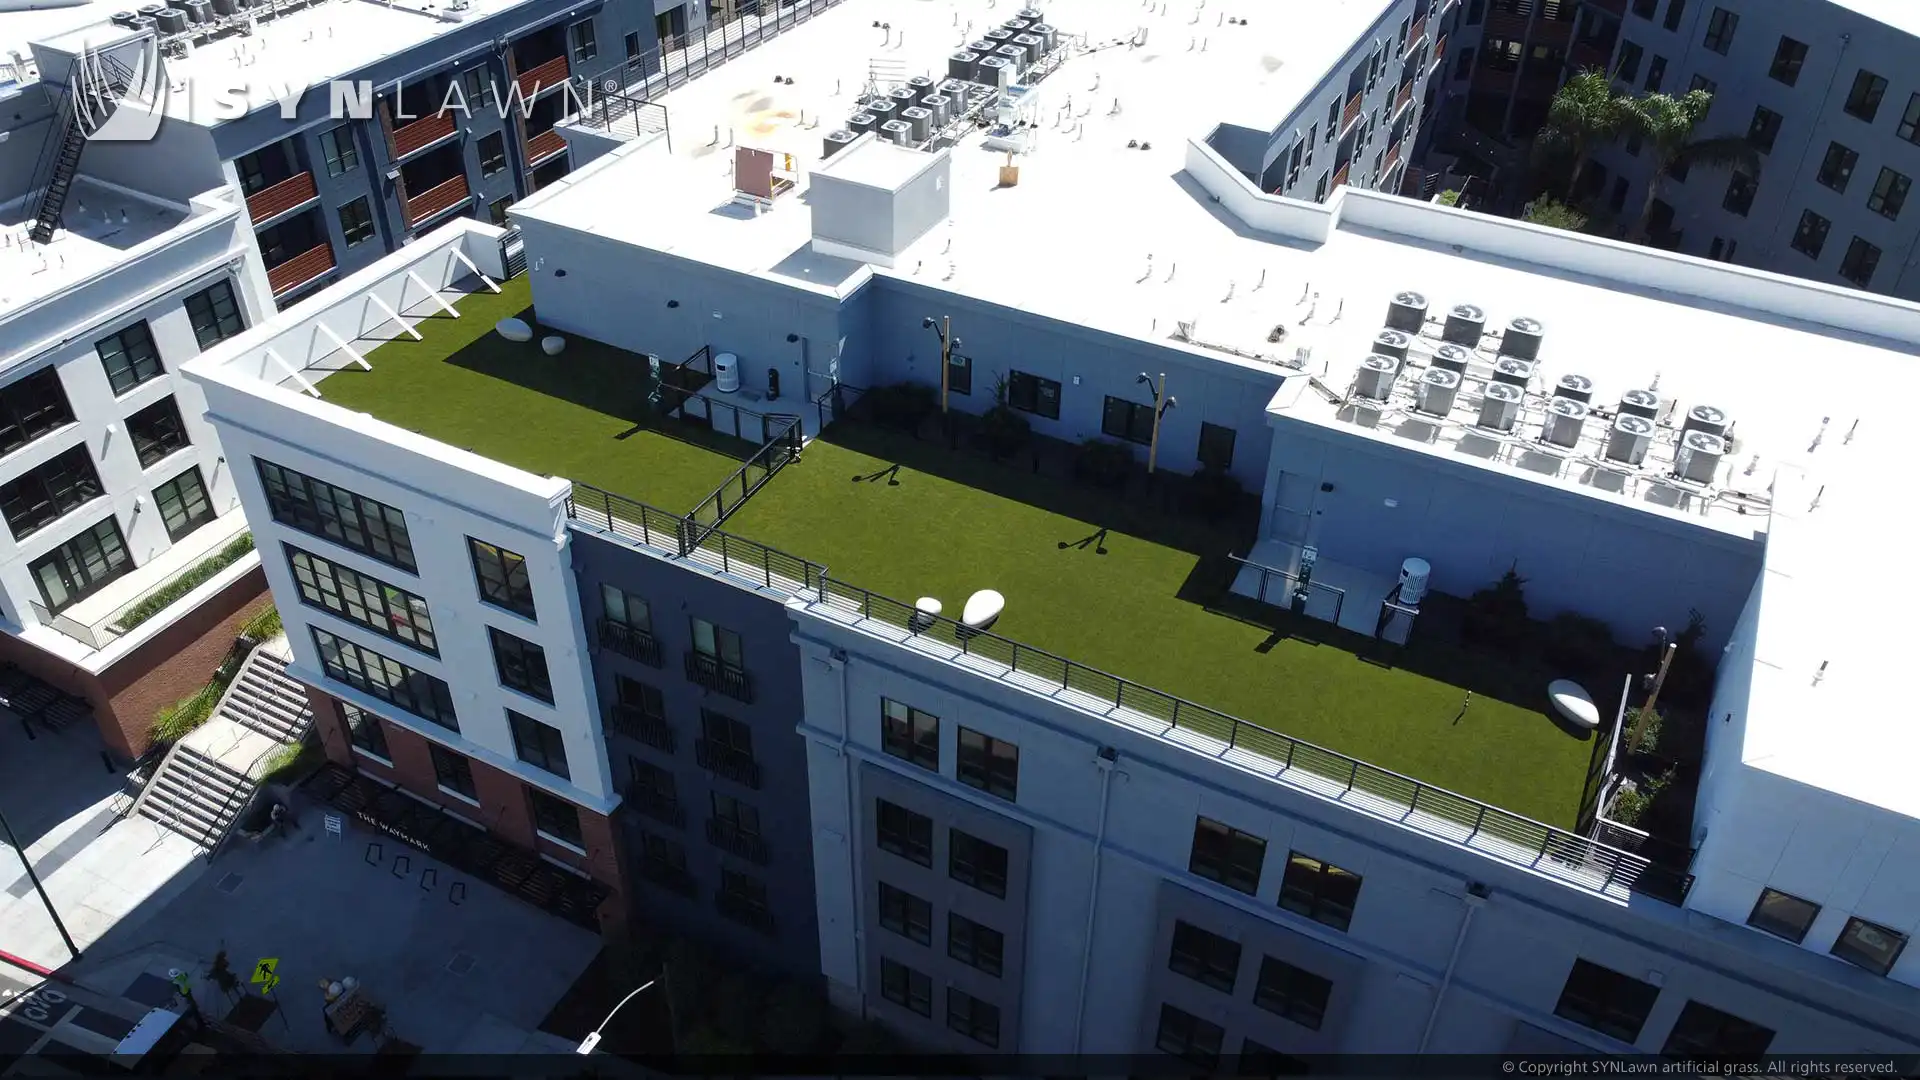 The Waymark Builds Rooftop Oasis to Provide Residents with Upscale Amenities